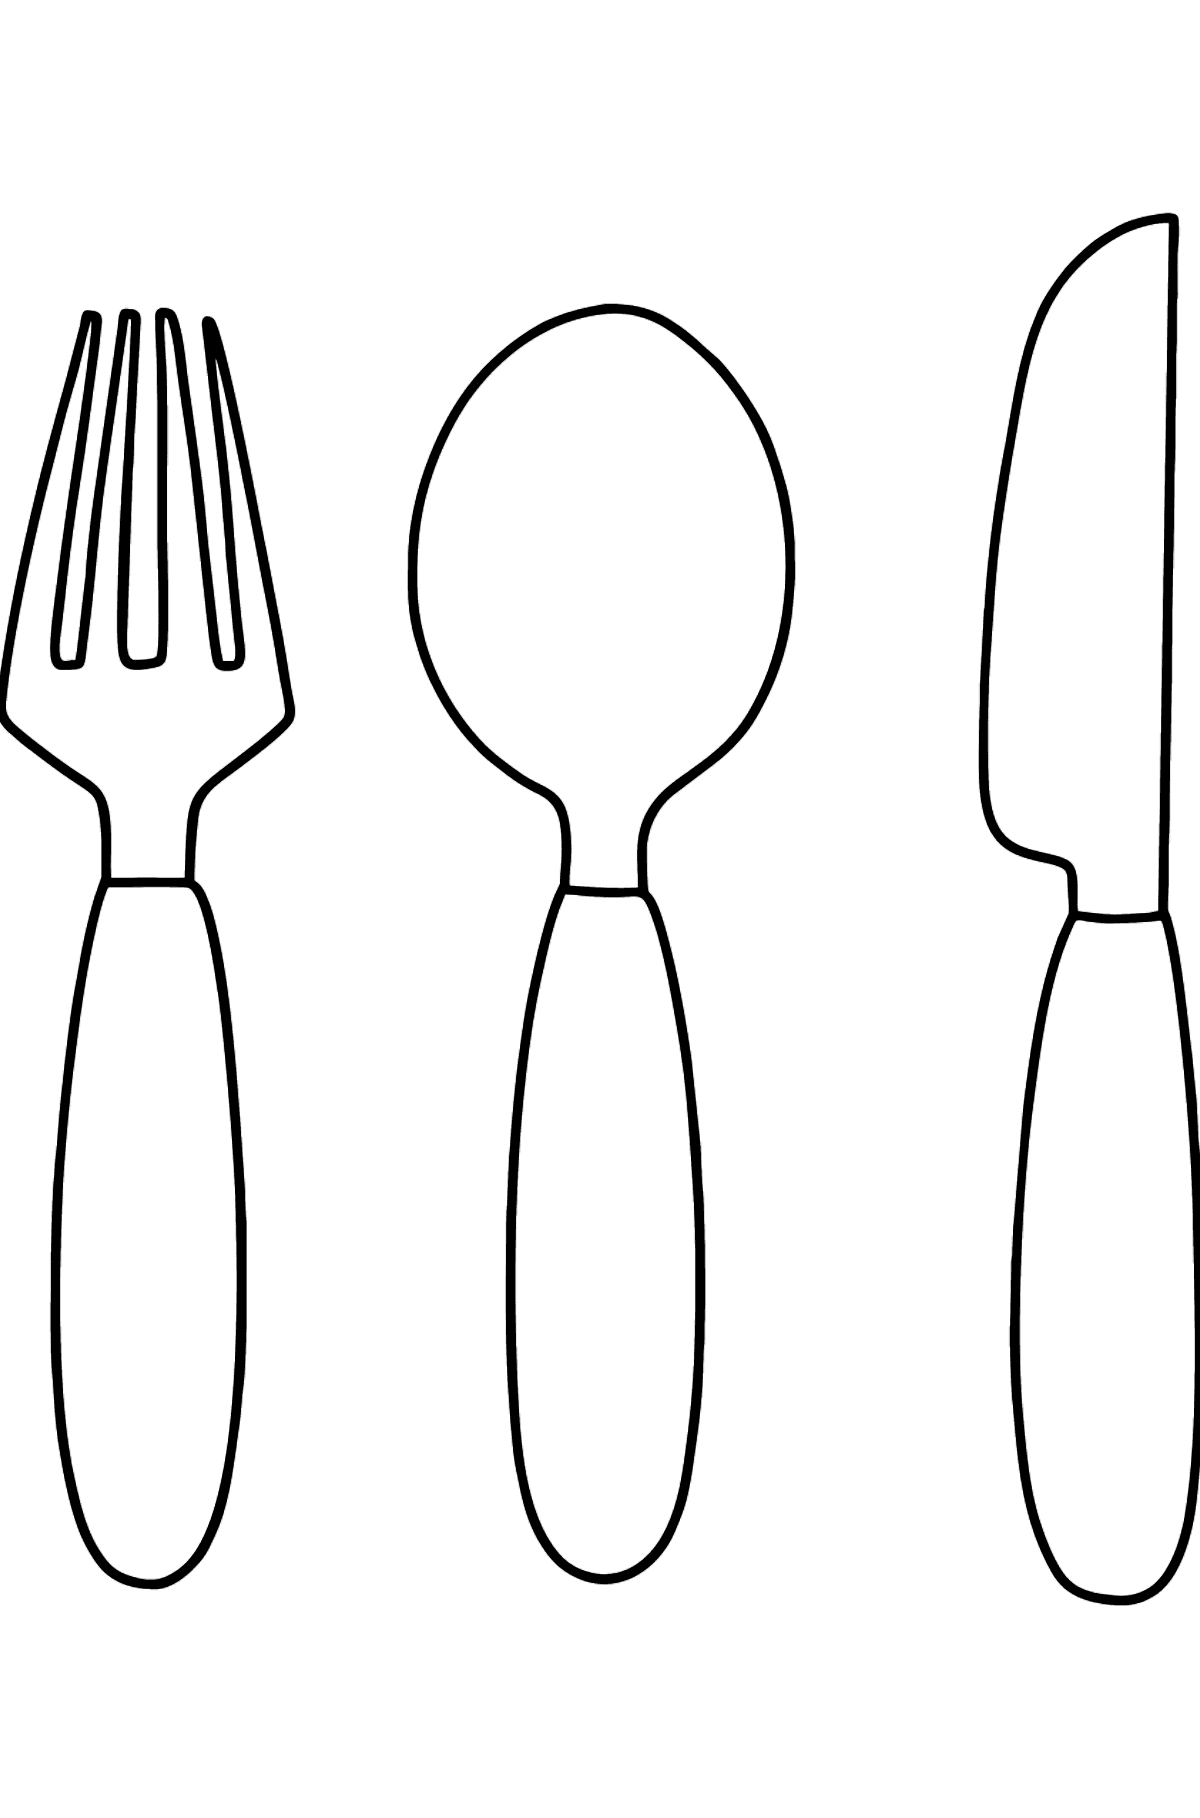 Cutlery coloring page - Coloring Pages for Kids